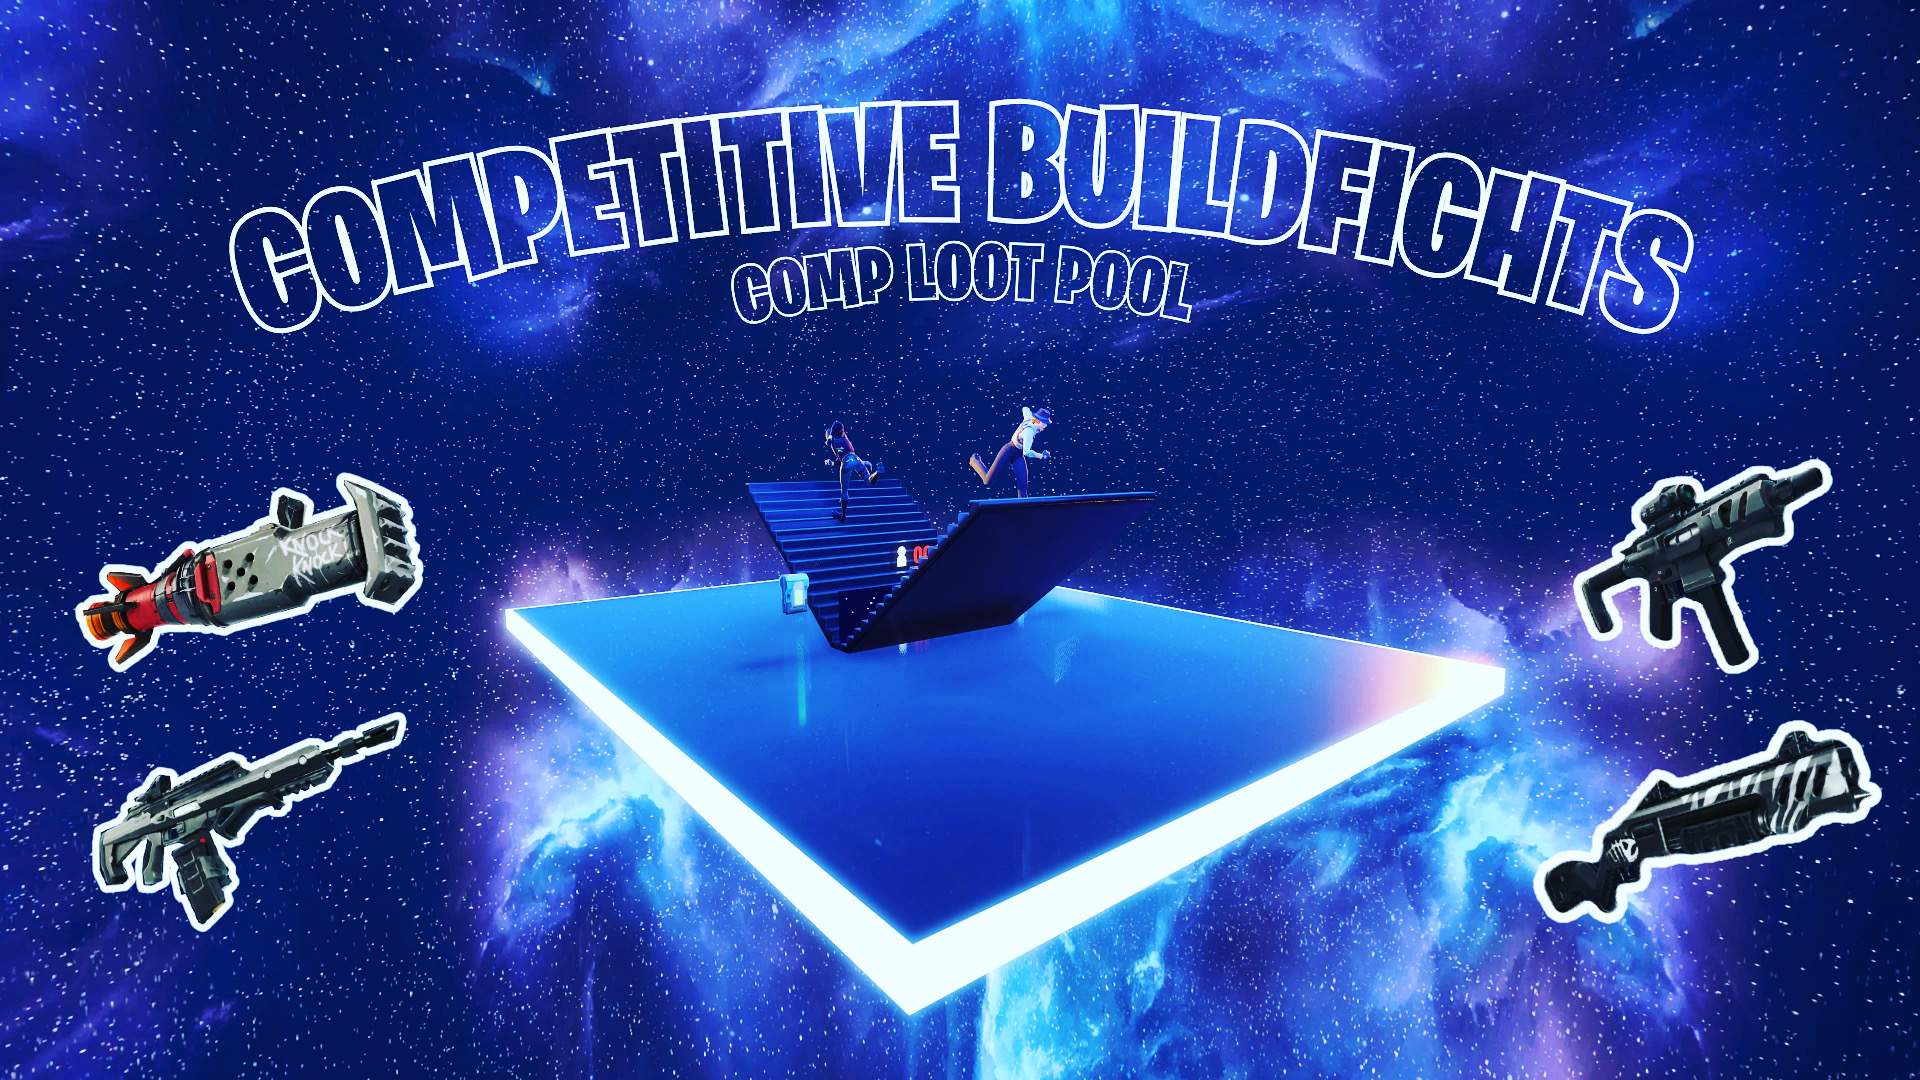 1V1 BUILDFIGHTS | COMP EDITION